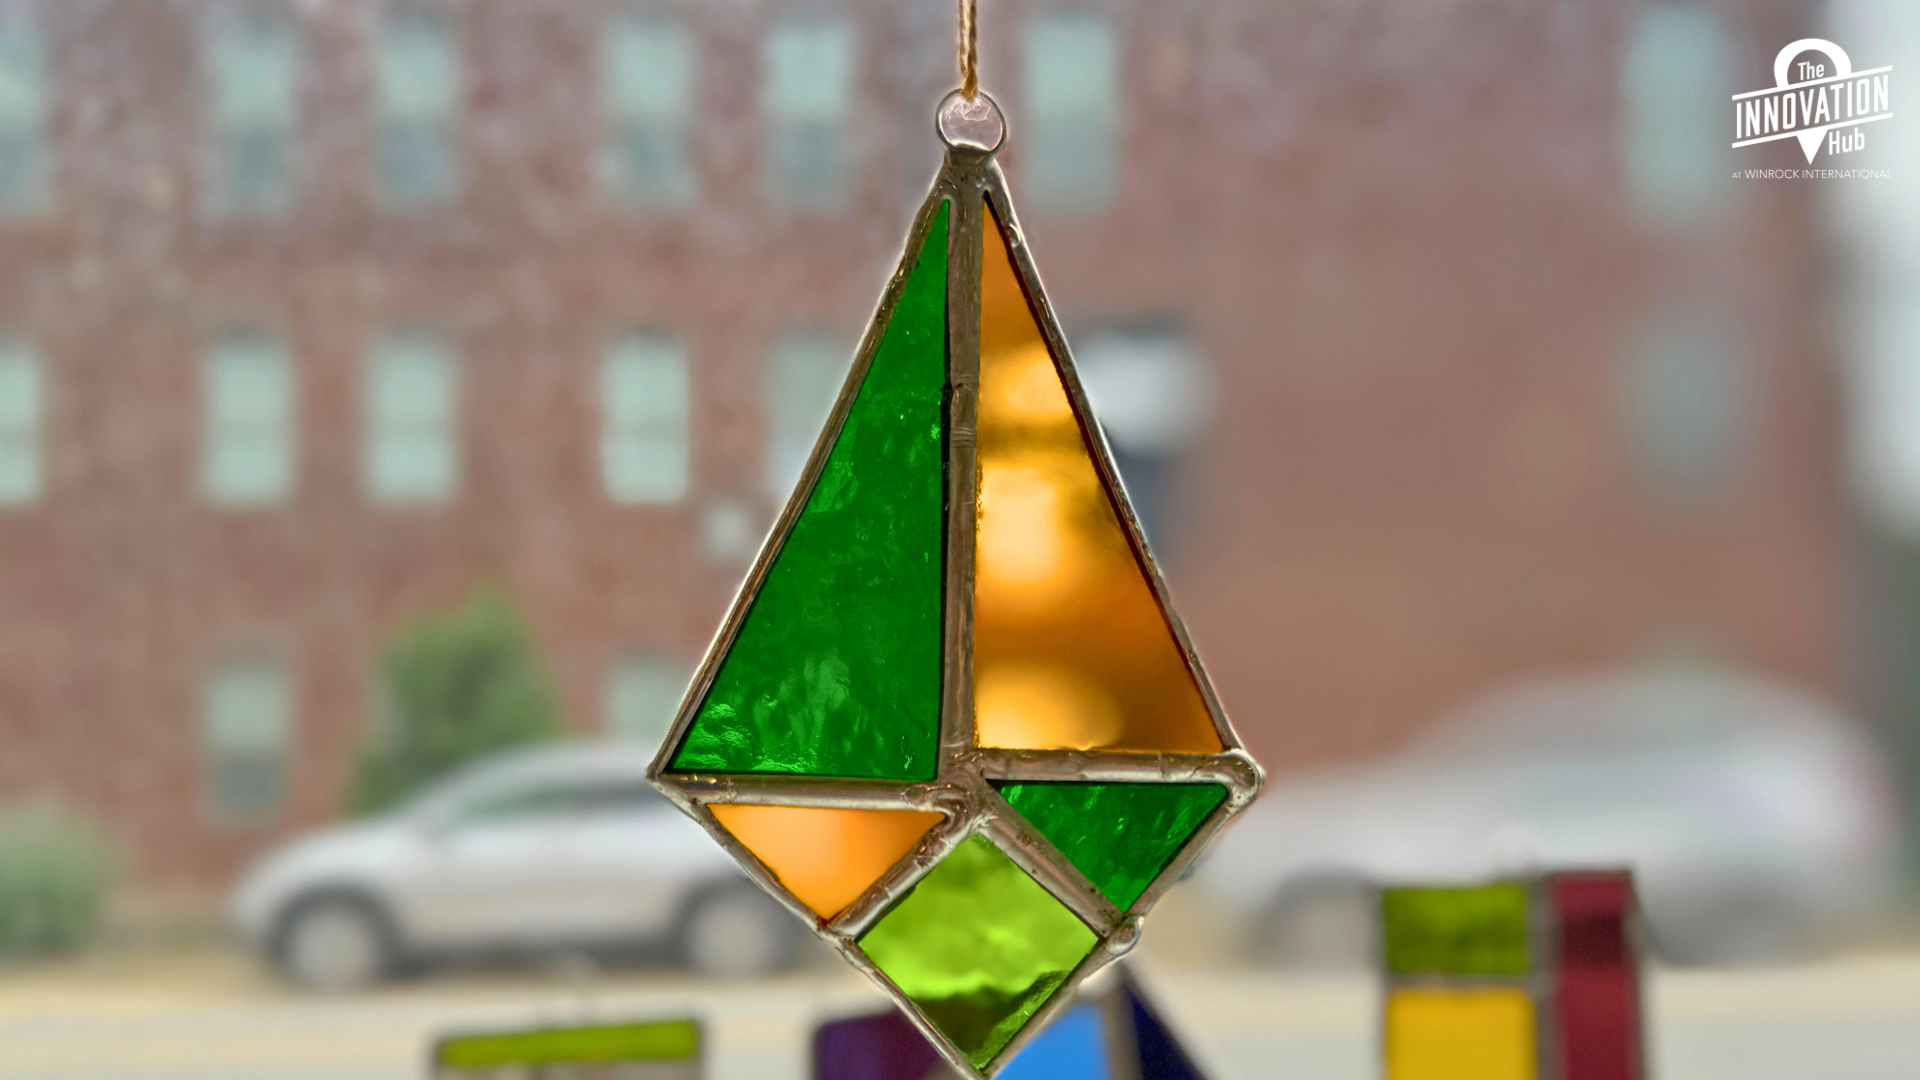 A stained glass sun catch in green and gold hangs in front of a window with other glass suncatchers in the background.